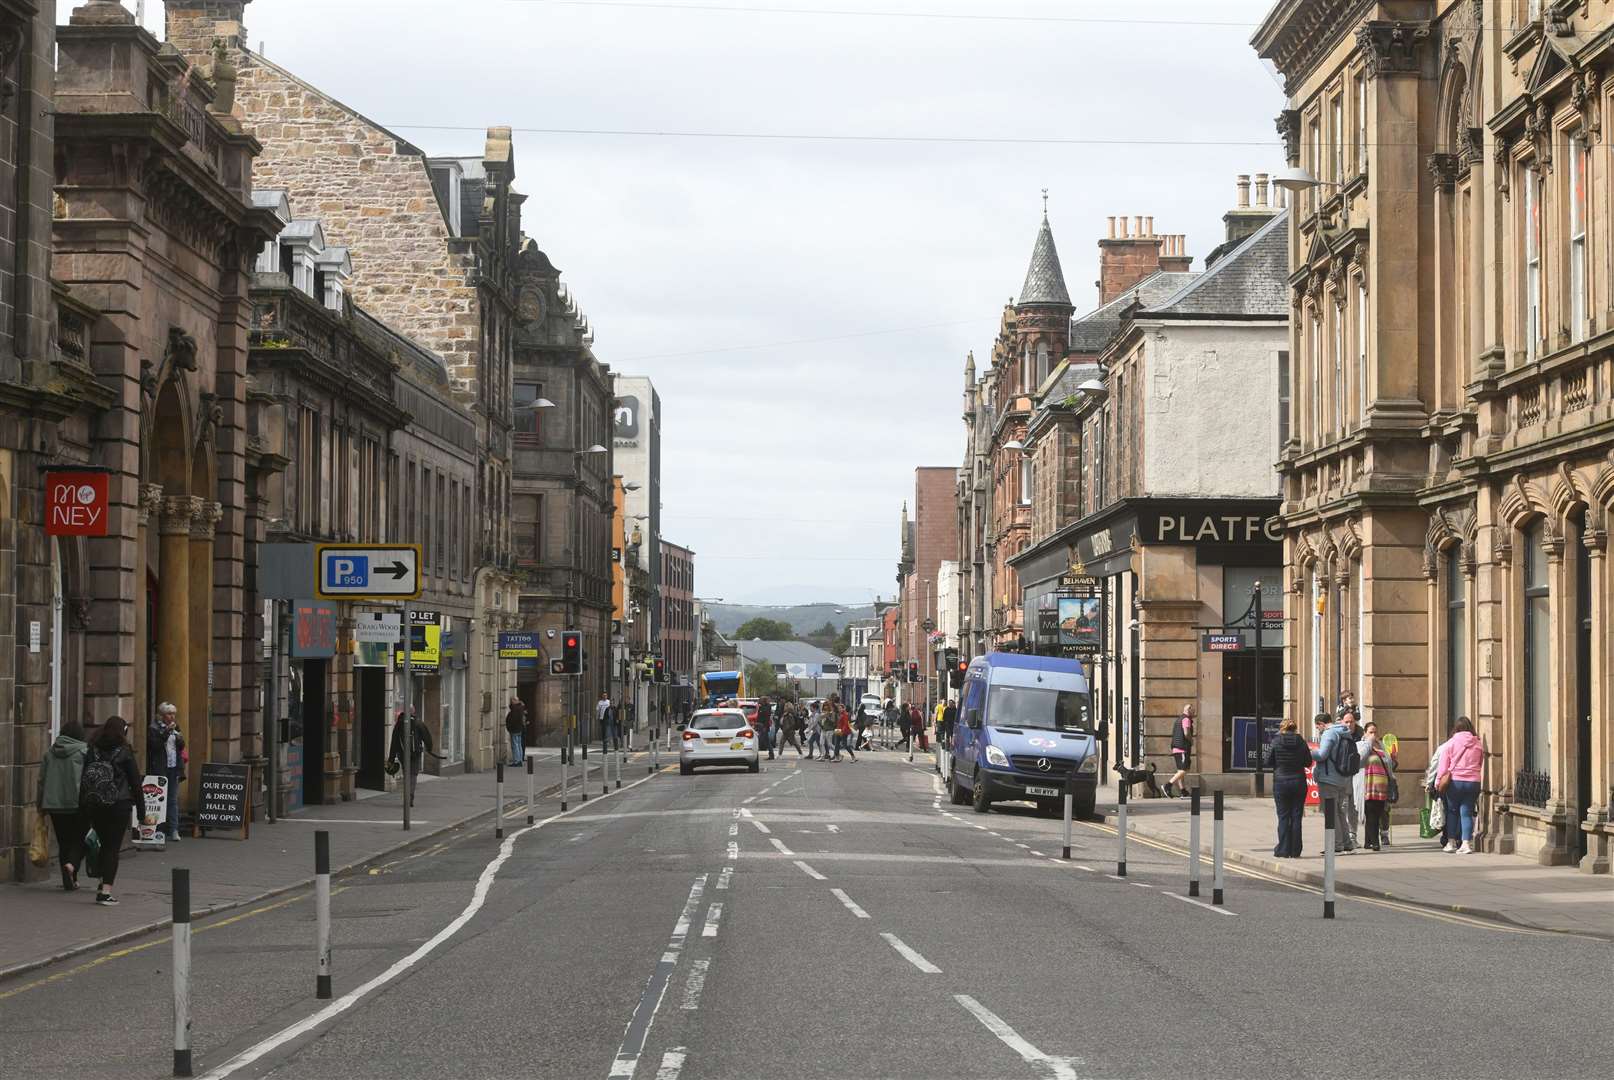 Academy Street in Inverness.